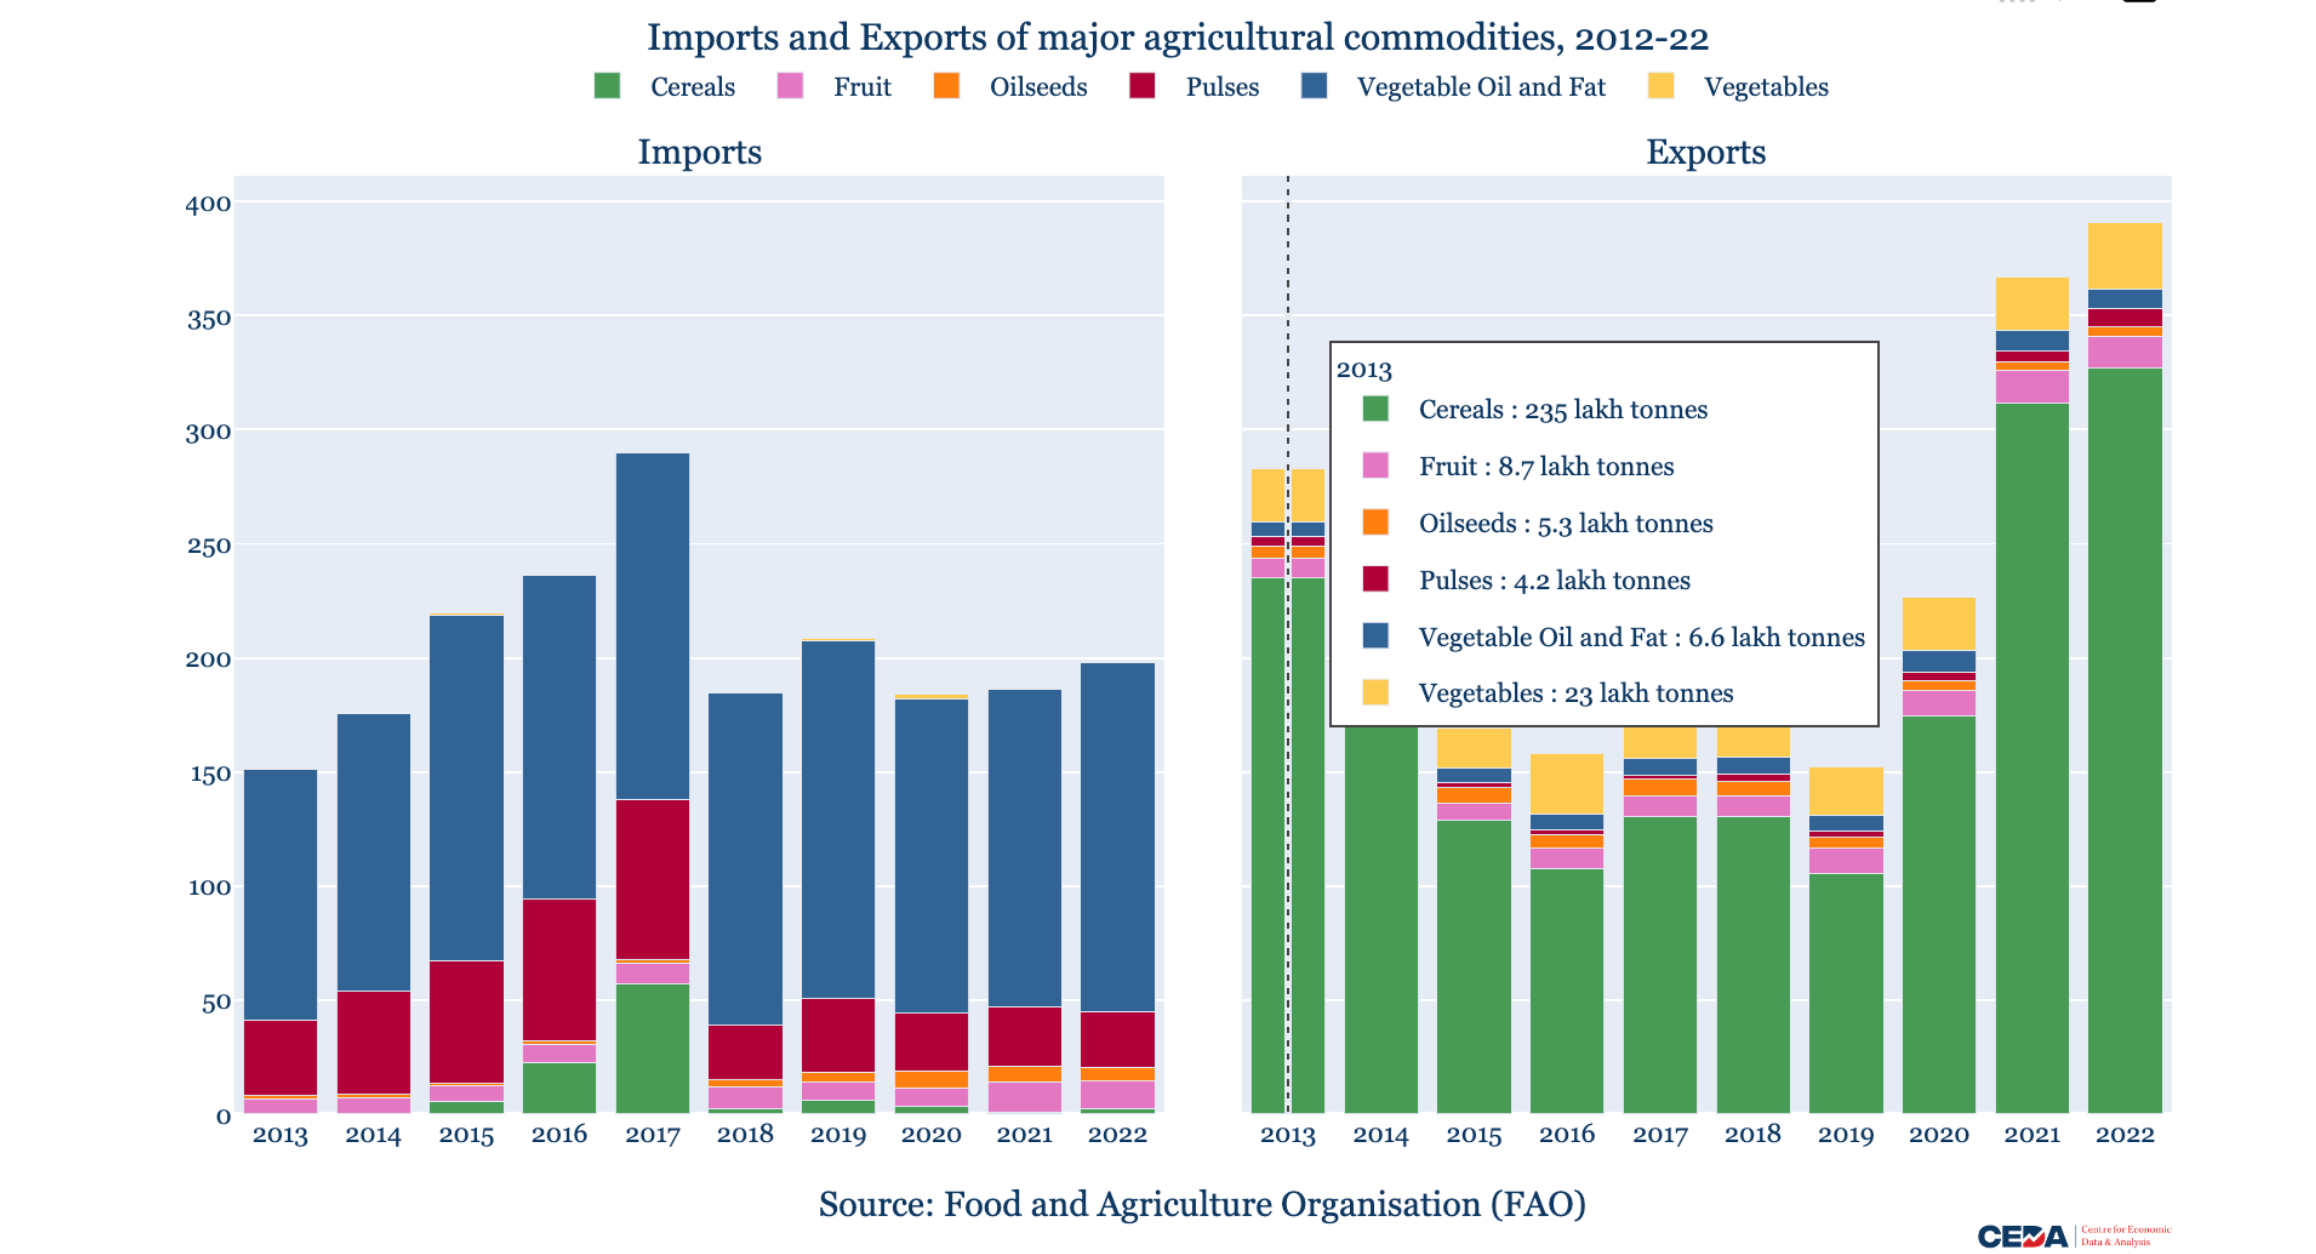  India’s agricultural goods trade, 2013-2022